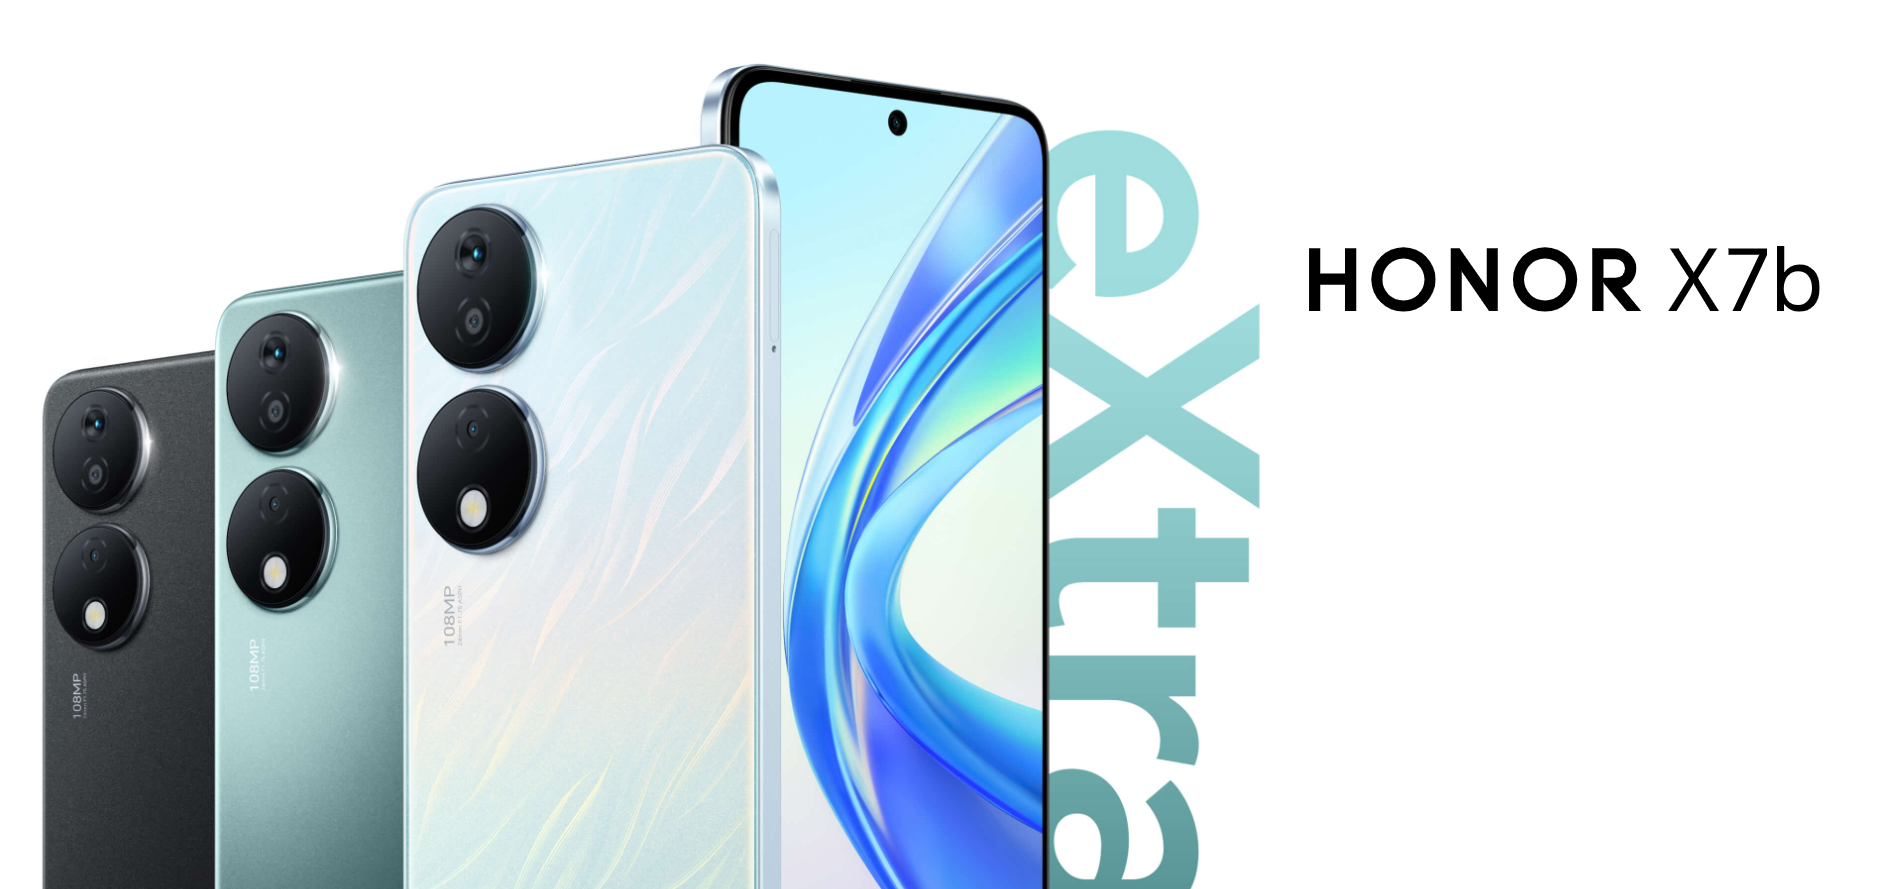 Honor X7b: Budget smartphone with 108MP main camera launched in Nepal